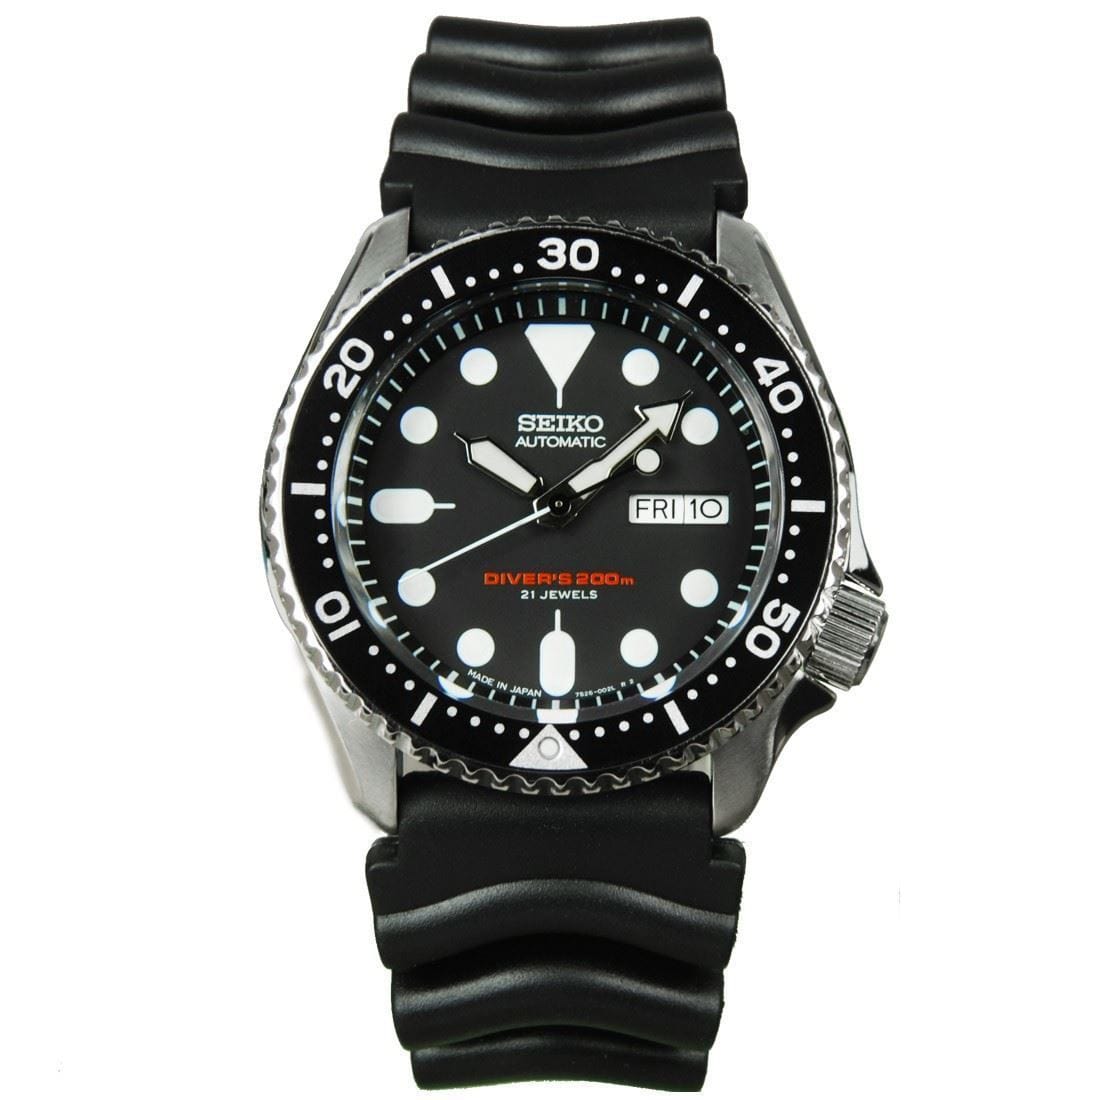 Seiko Automatic Watch SKX007J1 SKX007 with Additional Band